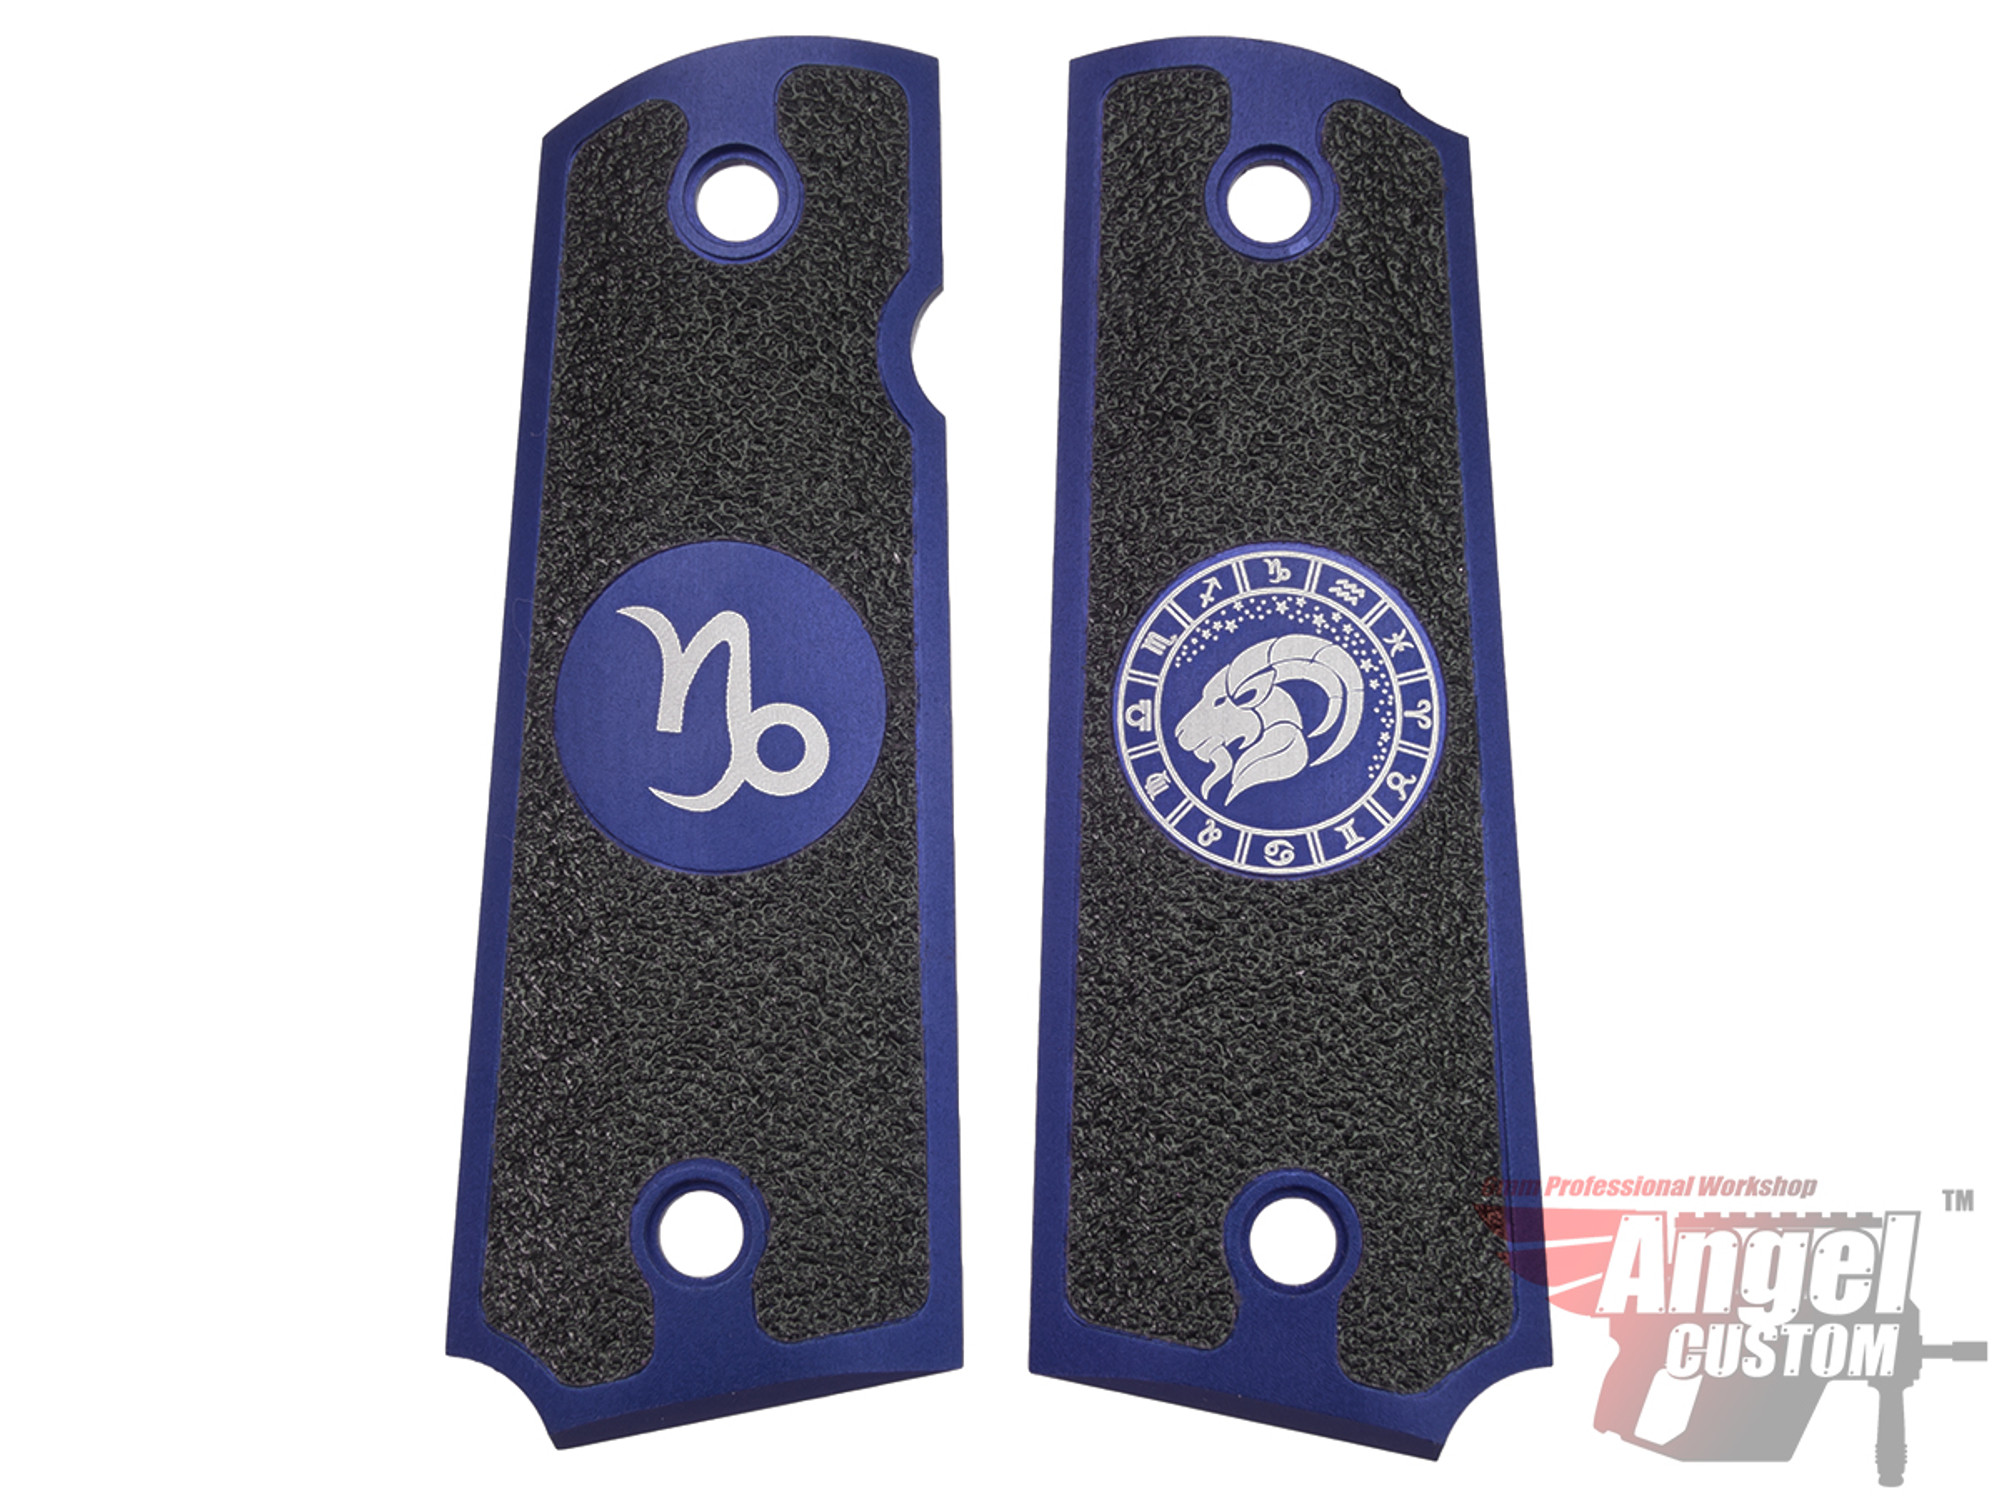 Angel Custom CNC Machined Tac-Glove "Zodiac" Grips for WE-Tech 1911 Series Airsoft Pistols - Navy Blue (Sign: Capricorn)